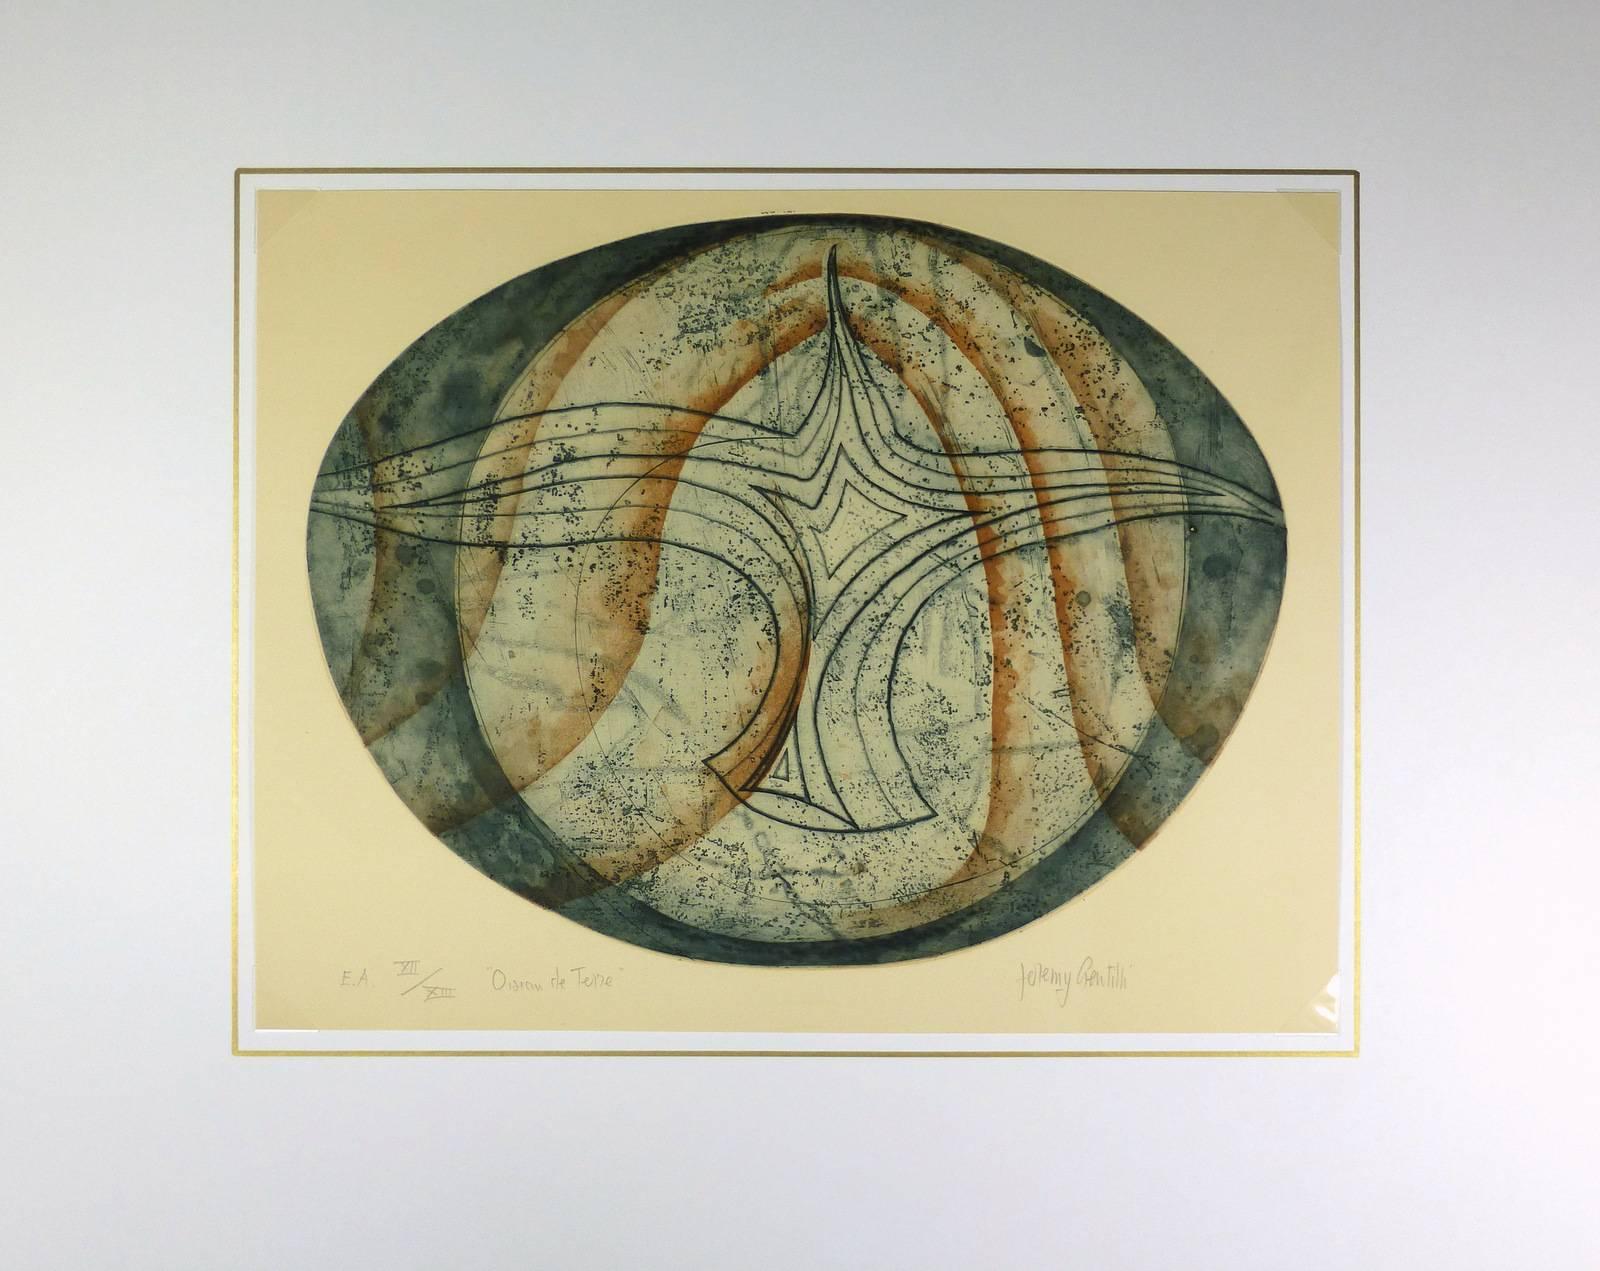 Beautifully detailed abstract etching artist proof by French artist Oiseau de Terre, circa 1990. Signed lower right.  

Original artwork on paper displayed on a white mat with a gold border. Mat fits a standard-size frame.  Archival plastic sleeve